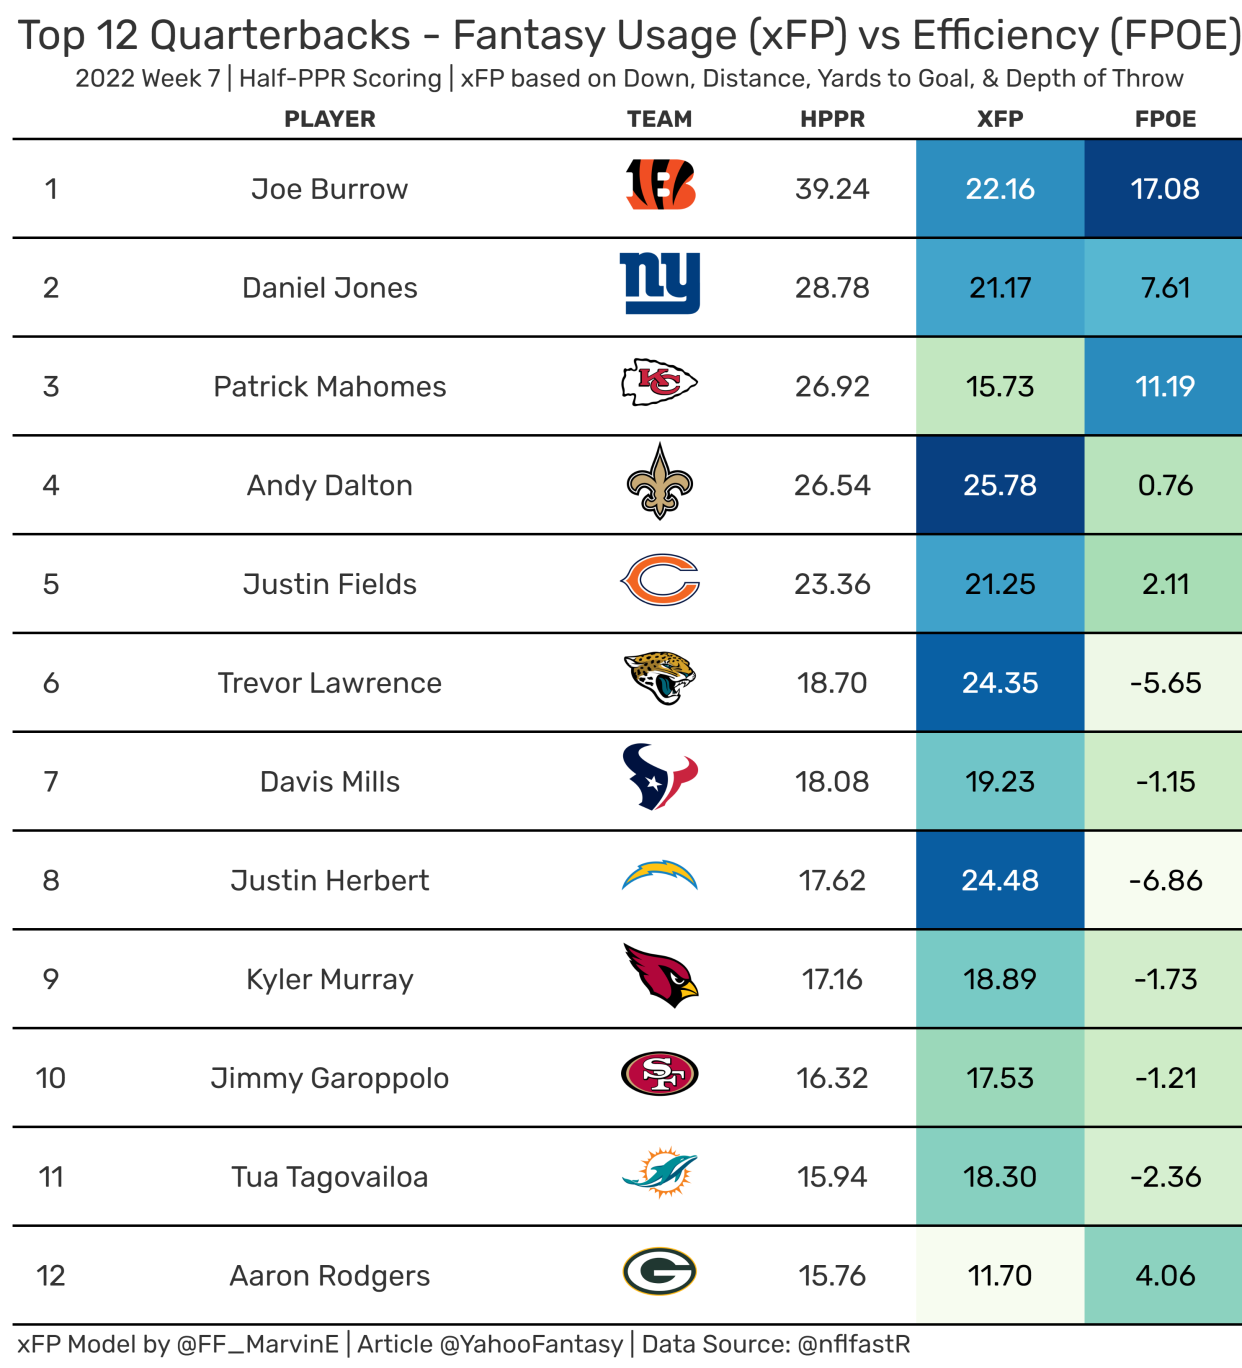 Top-12 Fantasy Quarterbacks from Week 7. (Data used provided by nflfastR)